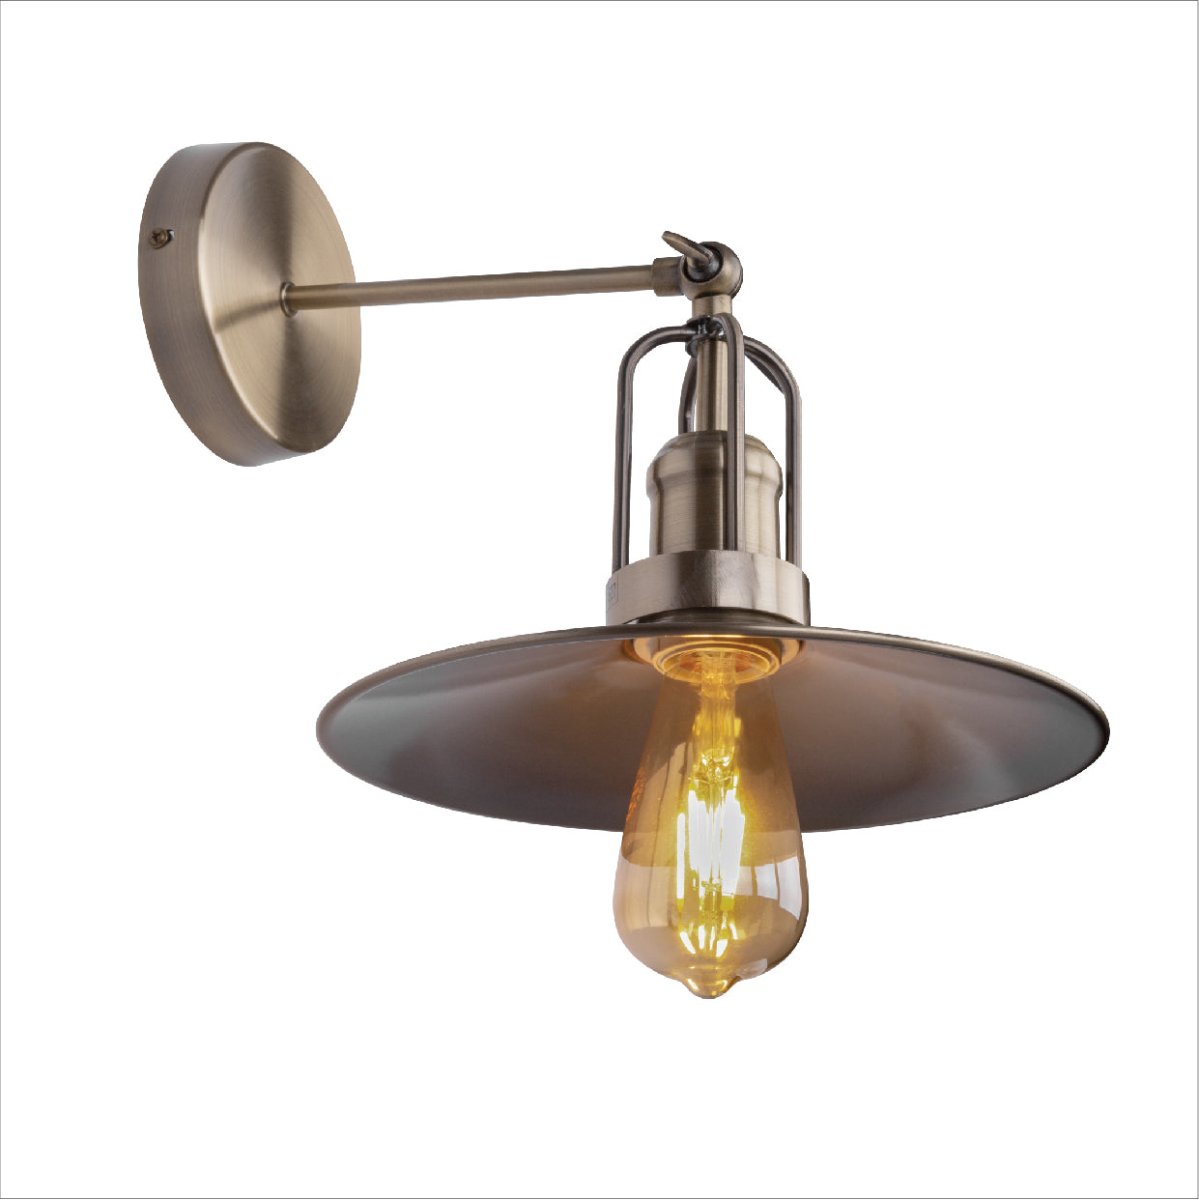 Main image of Antique Bronze Flat Metal Hinged Indutrial Retro Wall Light with E27 Fitting | TEKLED 151-19602